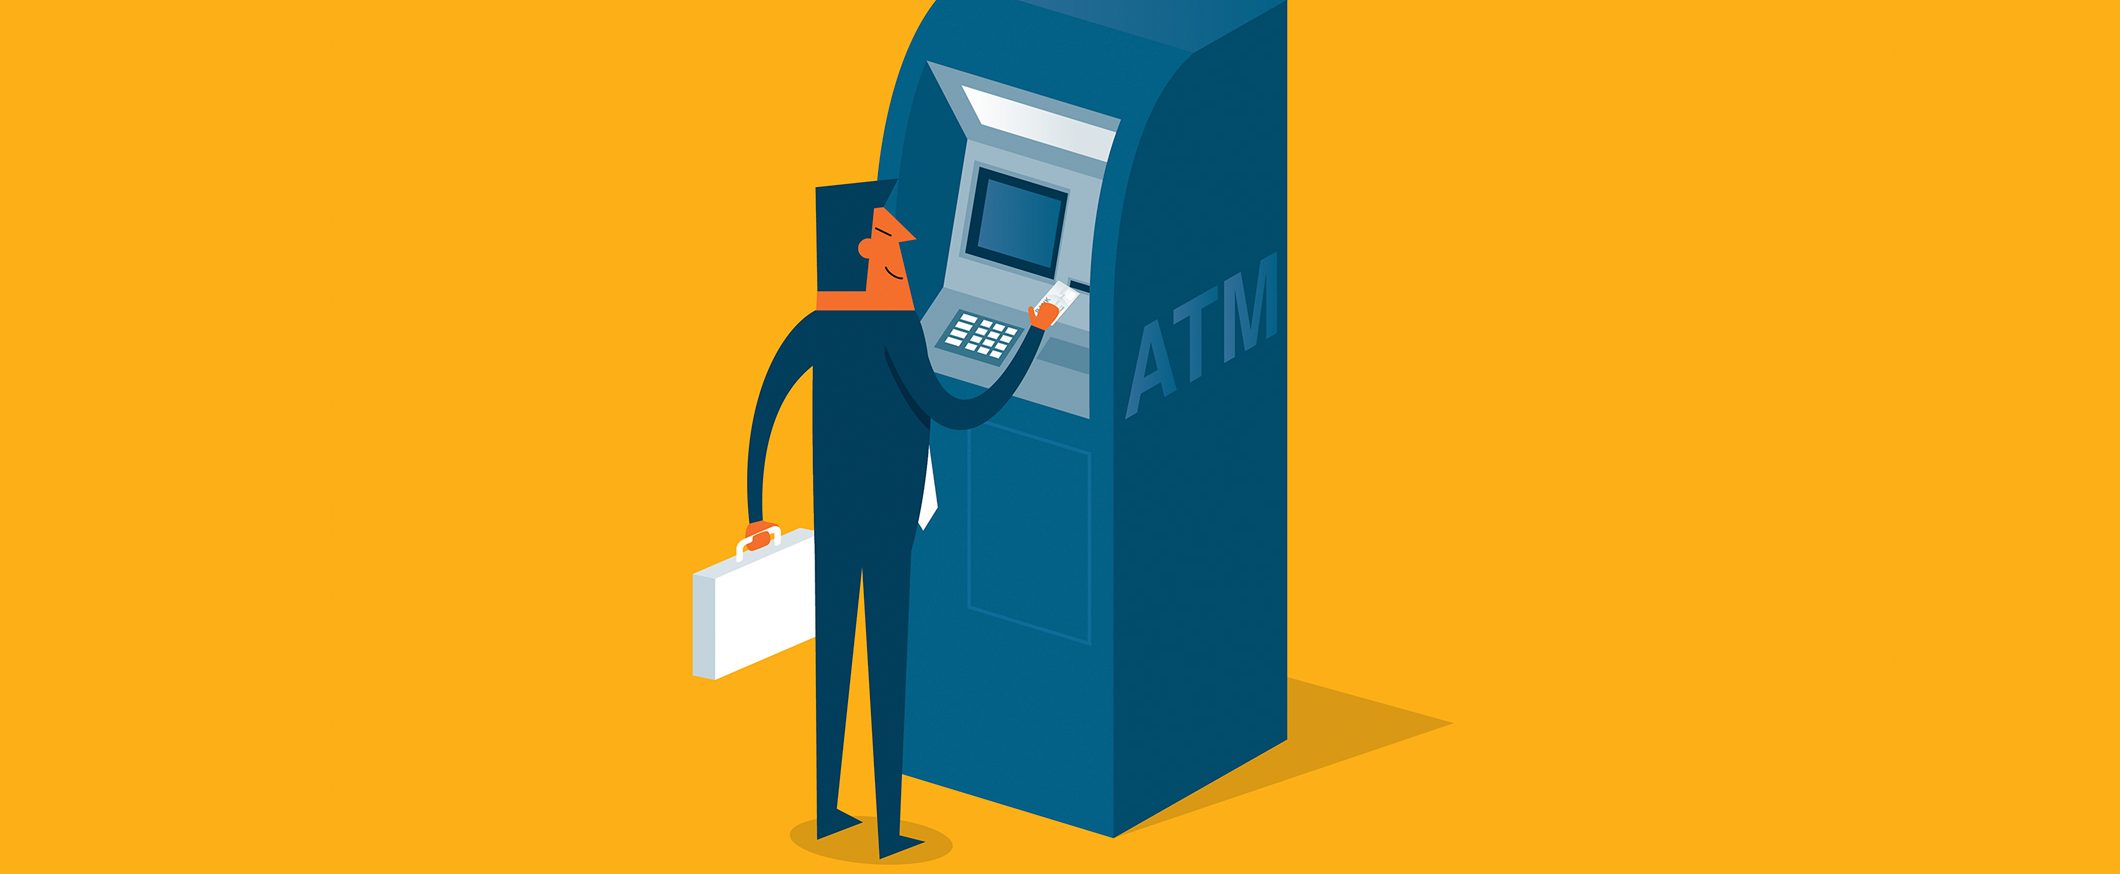 An illustration of a man with a briefcase using a debit card at a blue ATM machine.